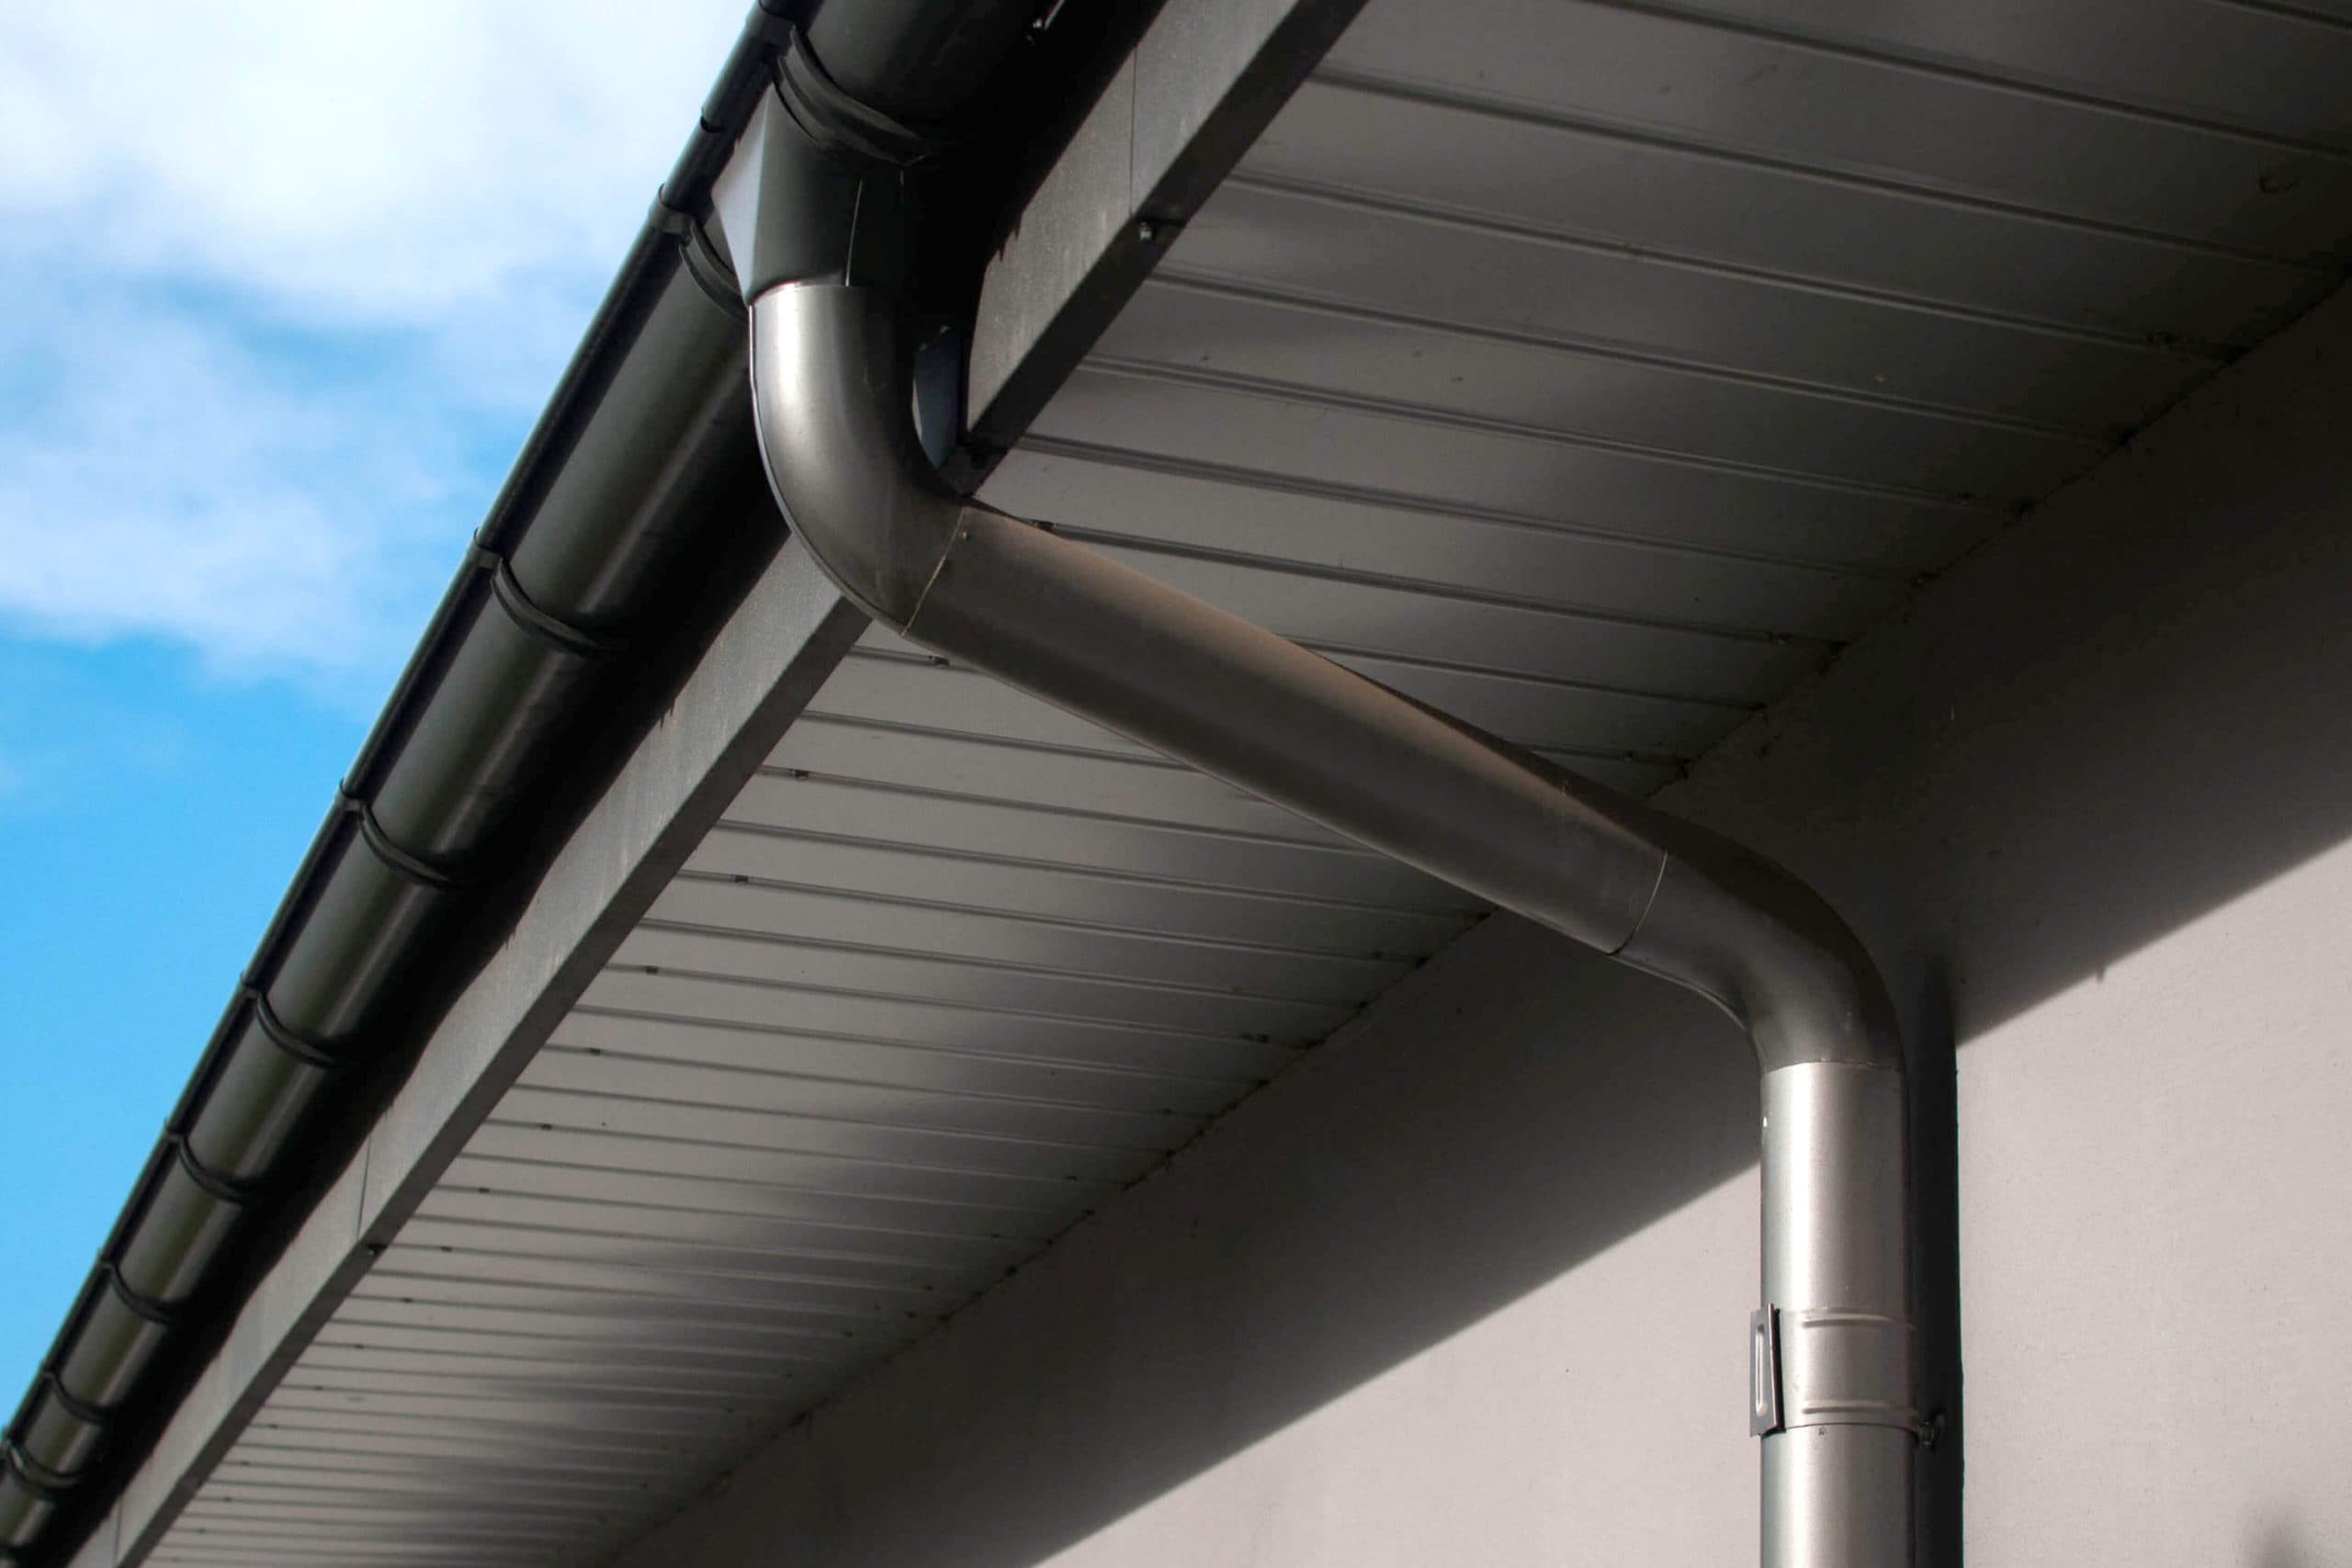 Reliable and affordable Galvanized gutters installation in Cumming